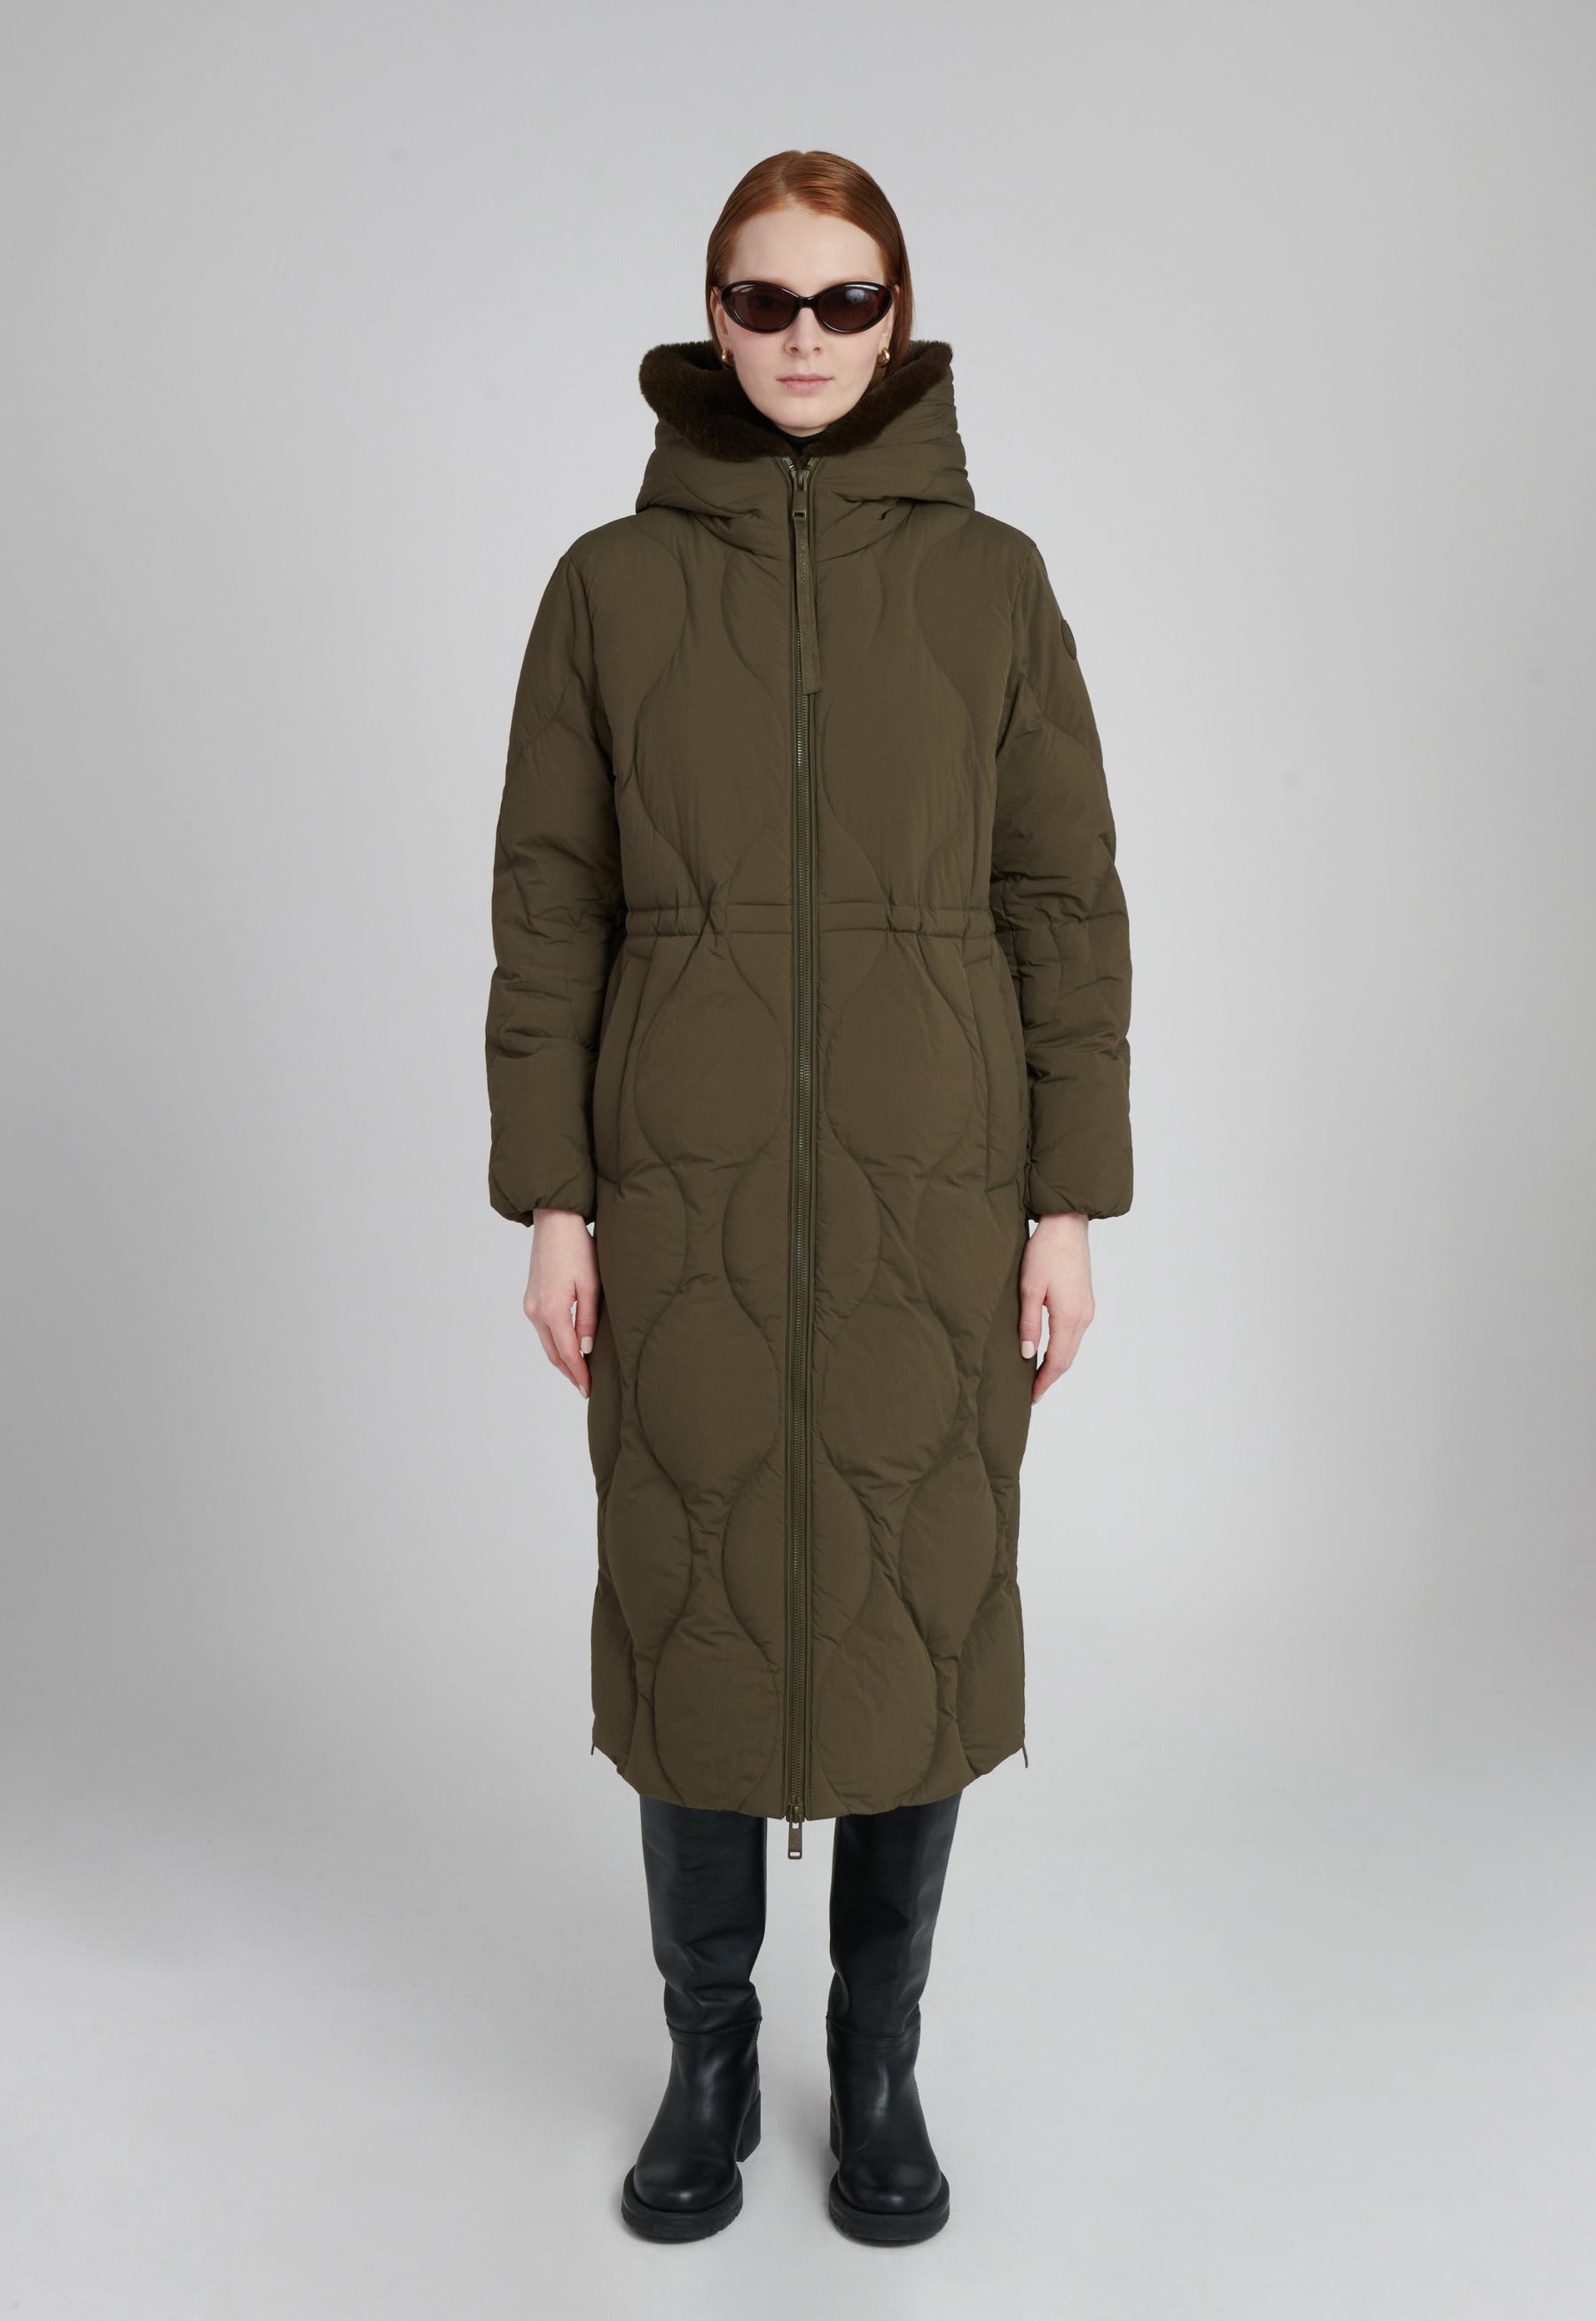 khaki olive green long quilted puffer coat with sherpa lining